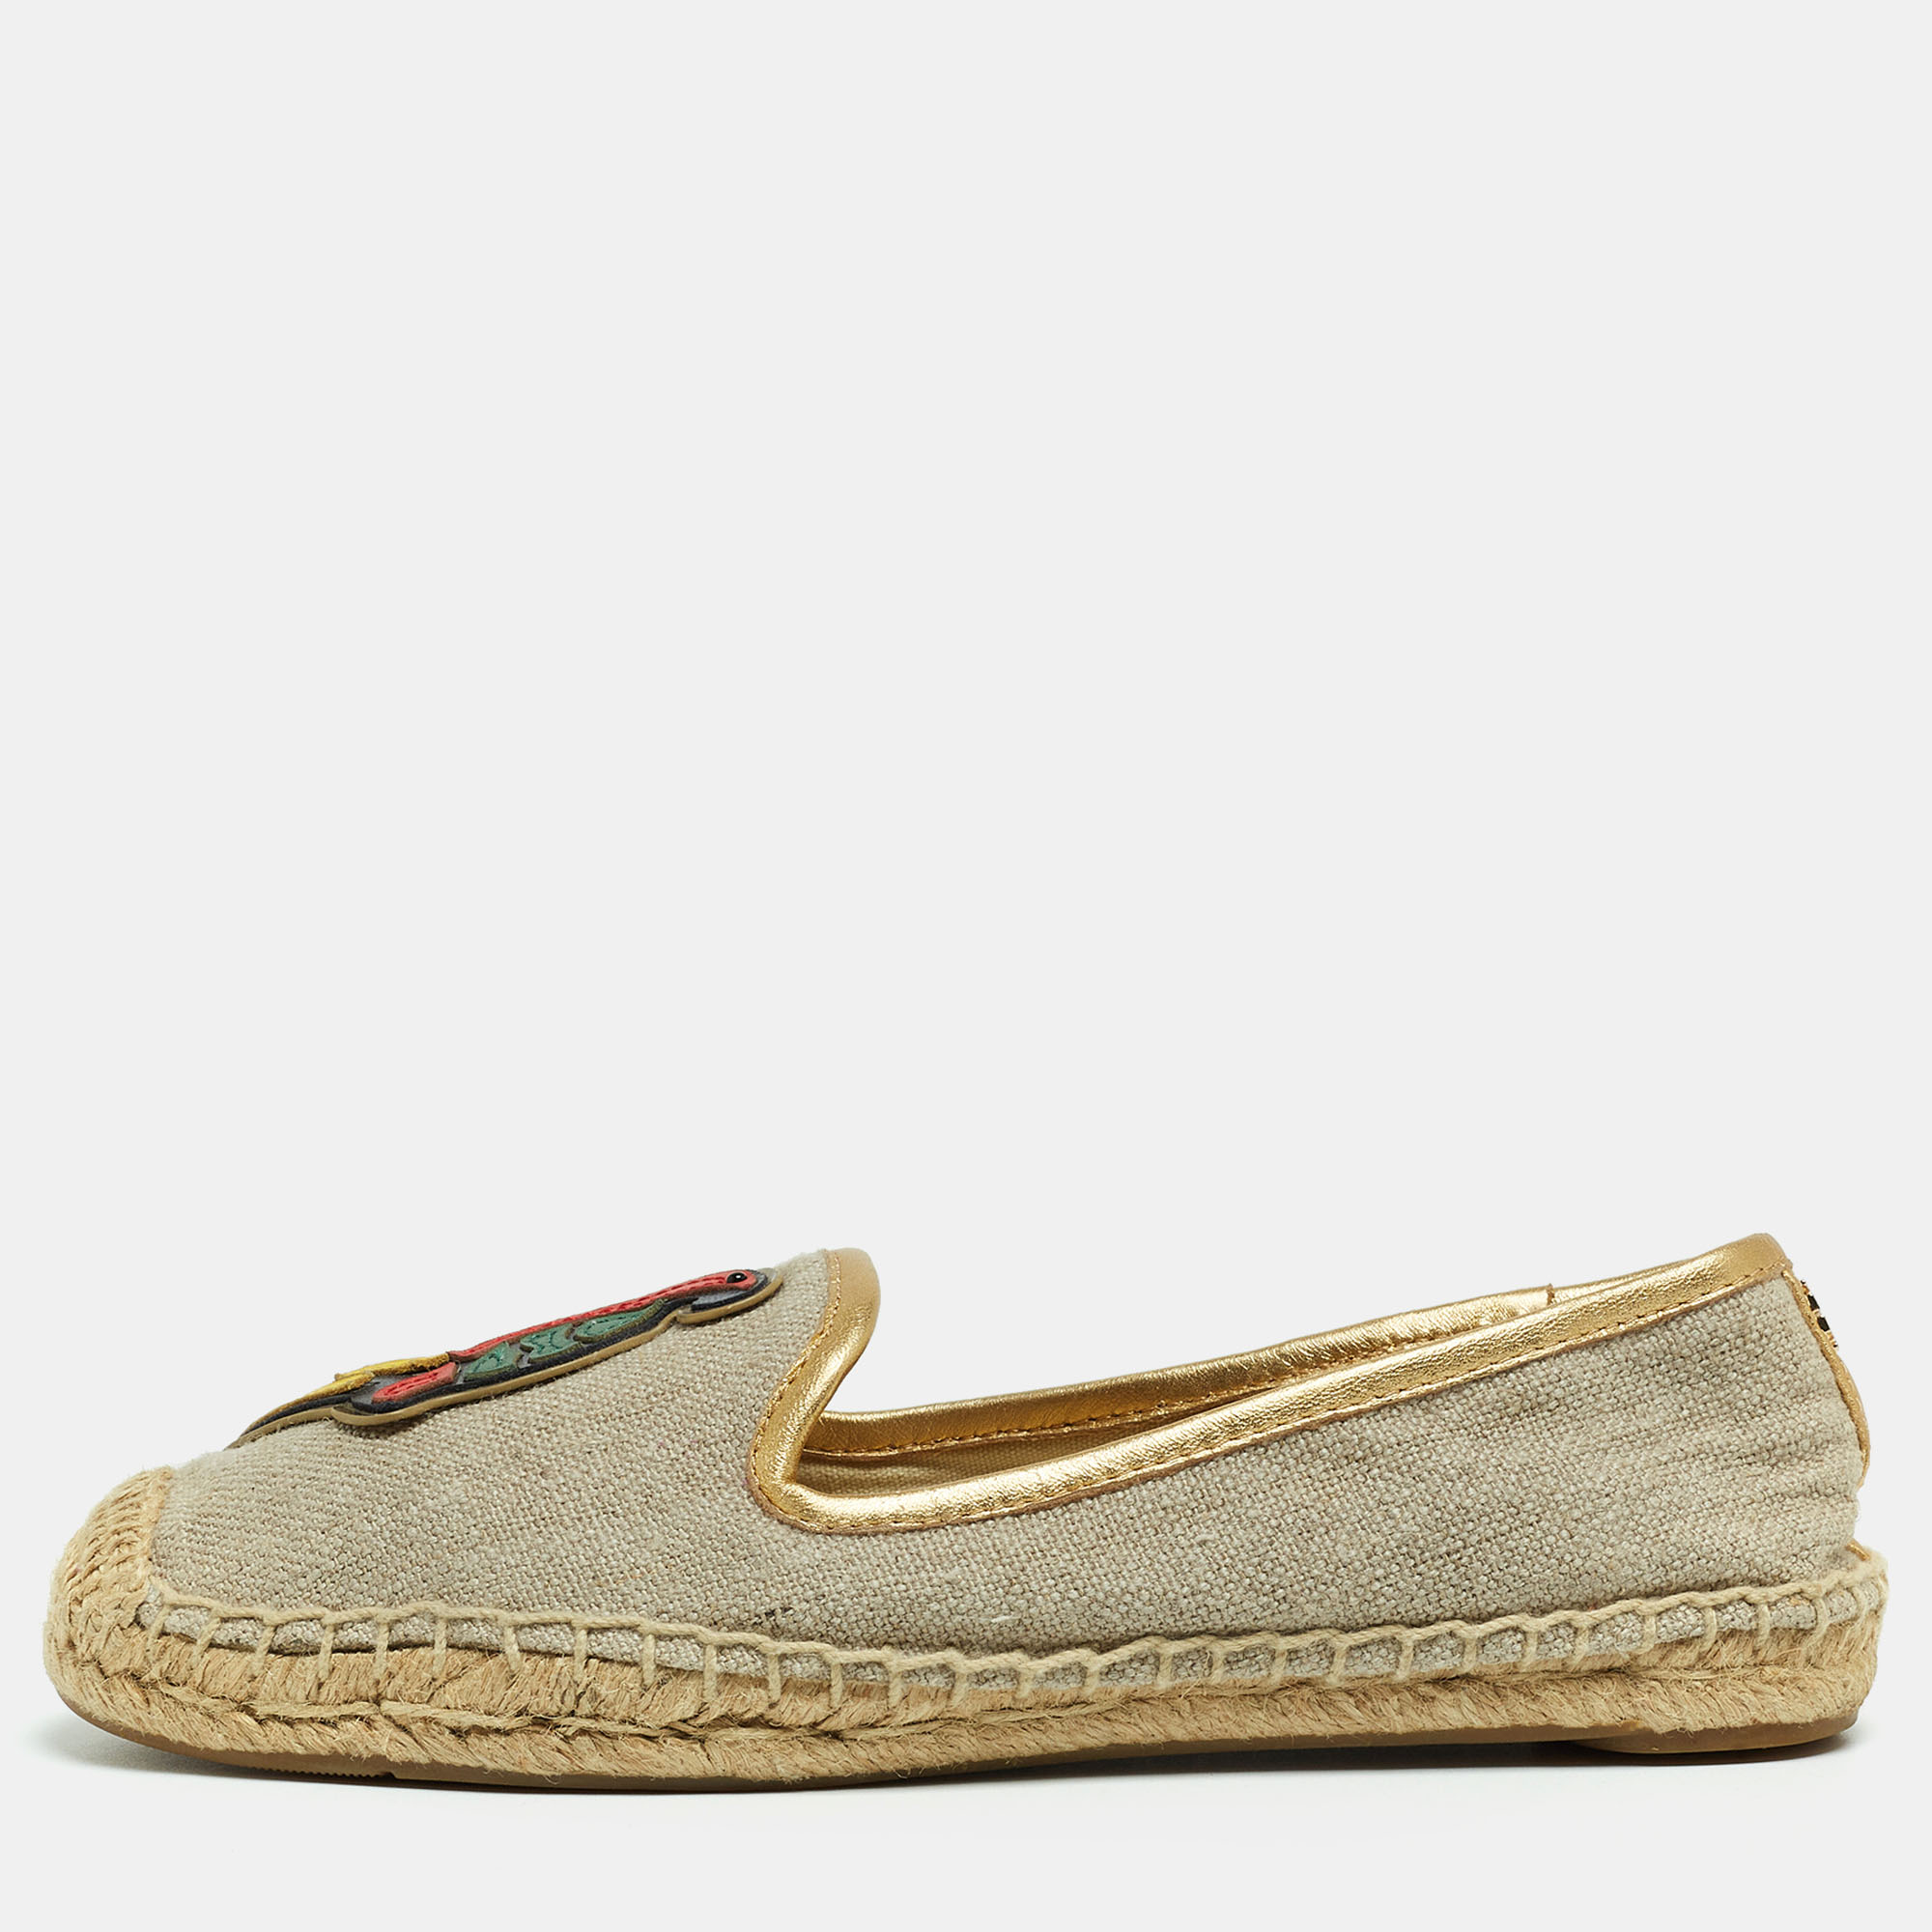 

Tory Burch Beige/Metallic Leather and Canvas Trim Parrot Espadrilles Flats Size, Grey